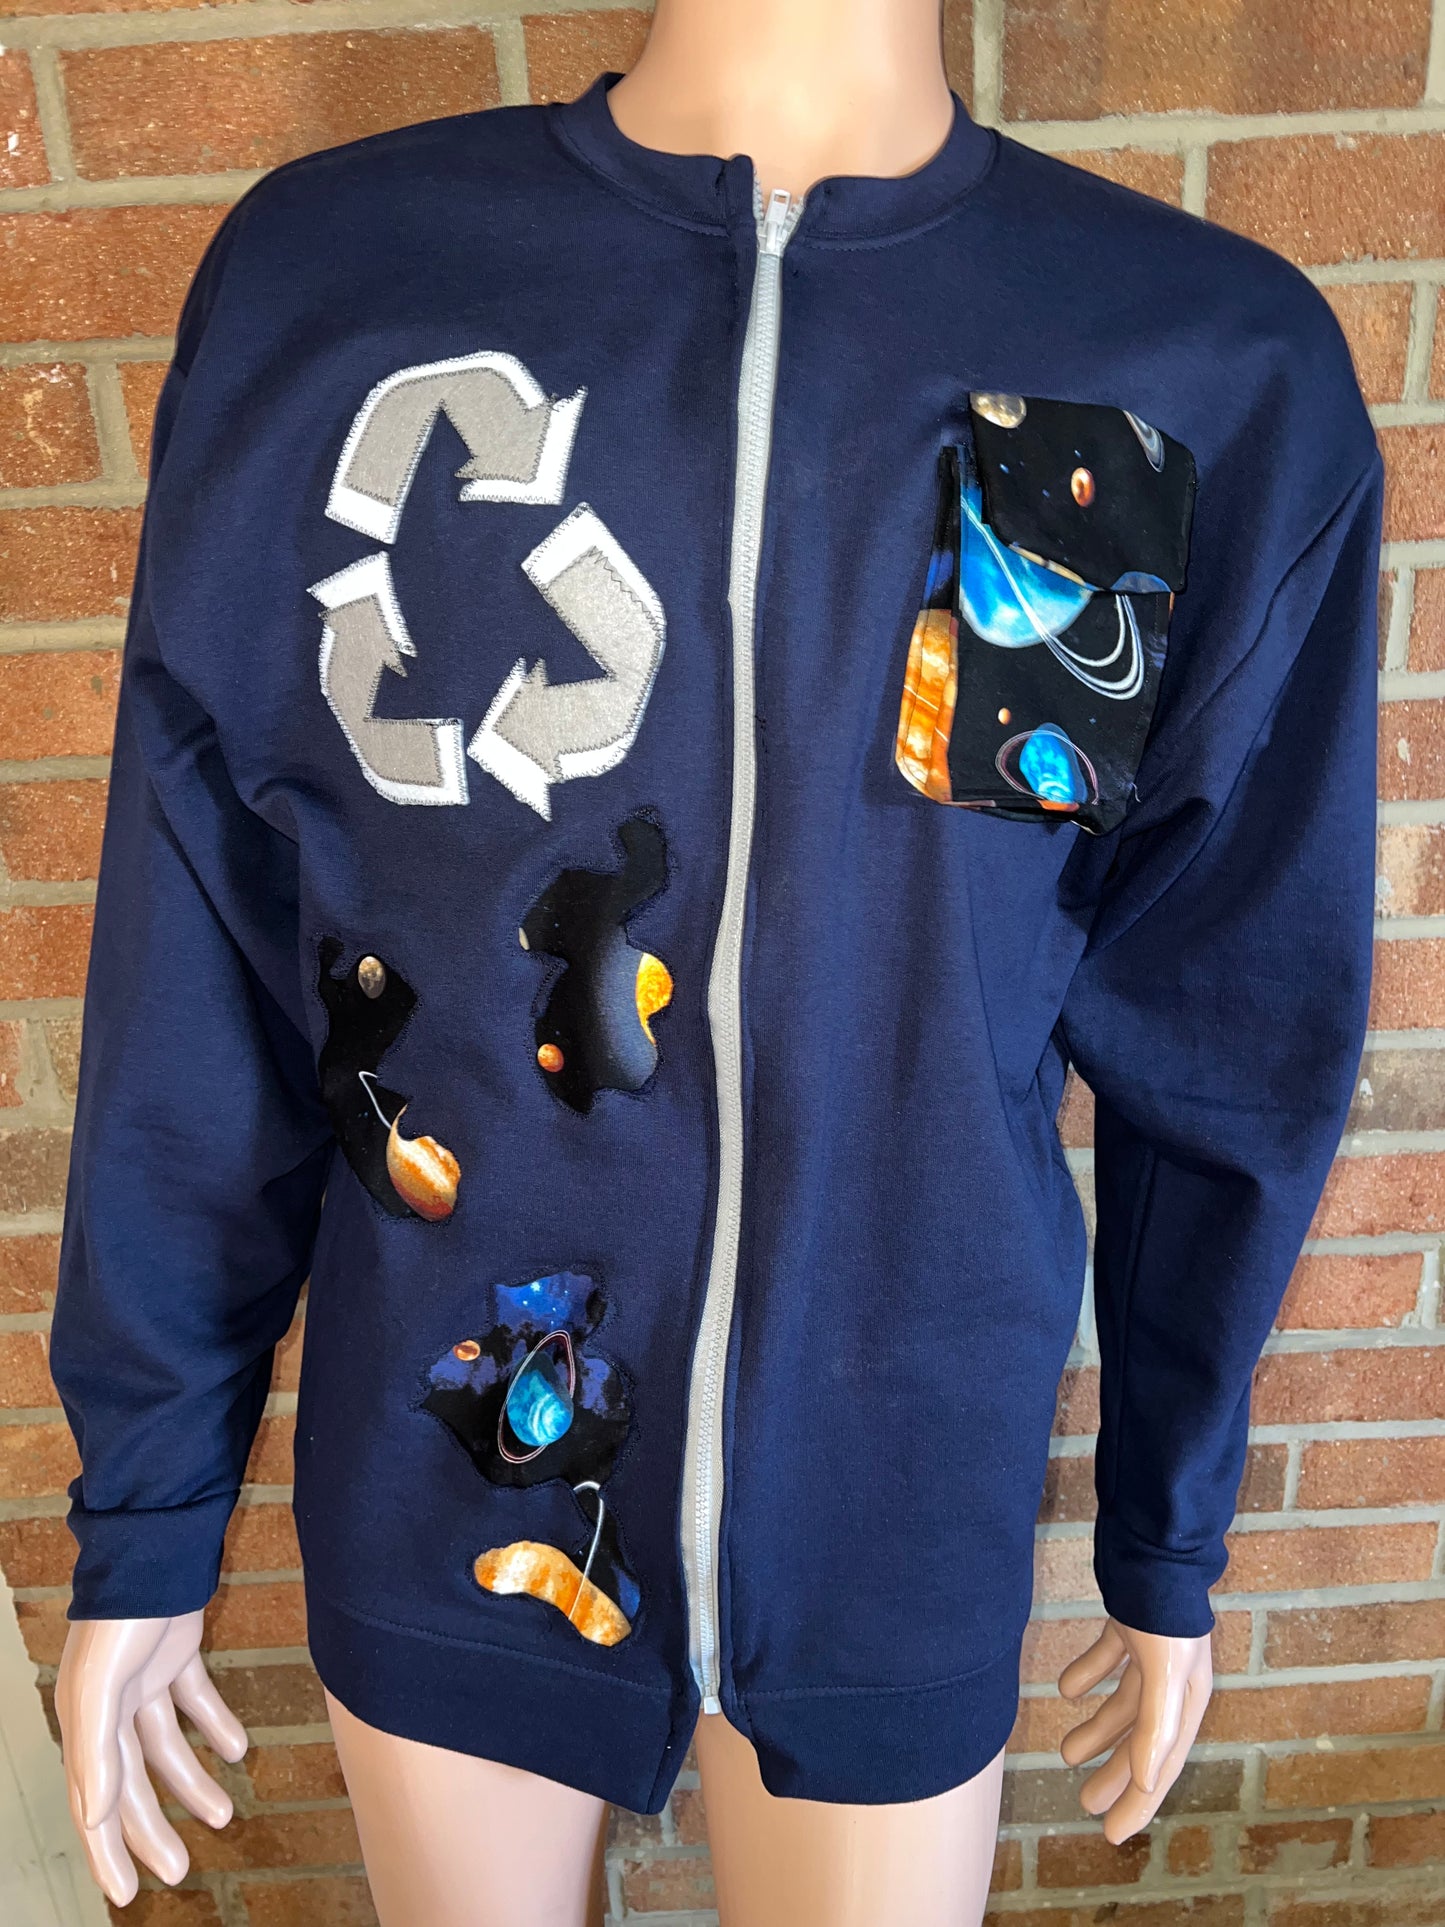 Galaxy Recycle Navy Blue Bomber Jacket (1 of 1)